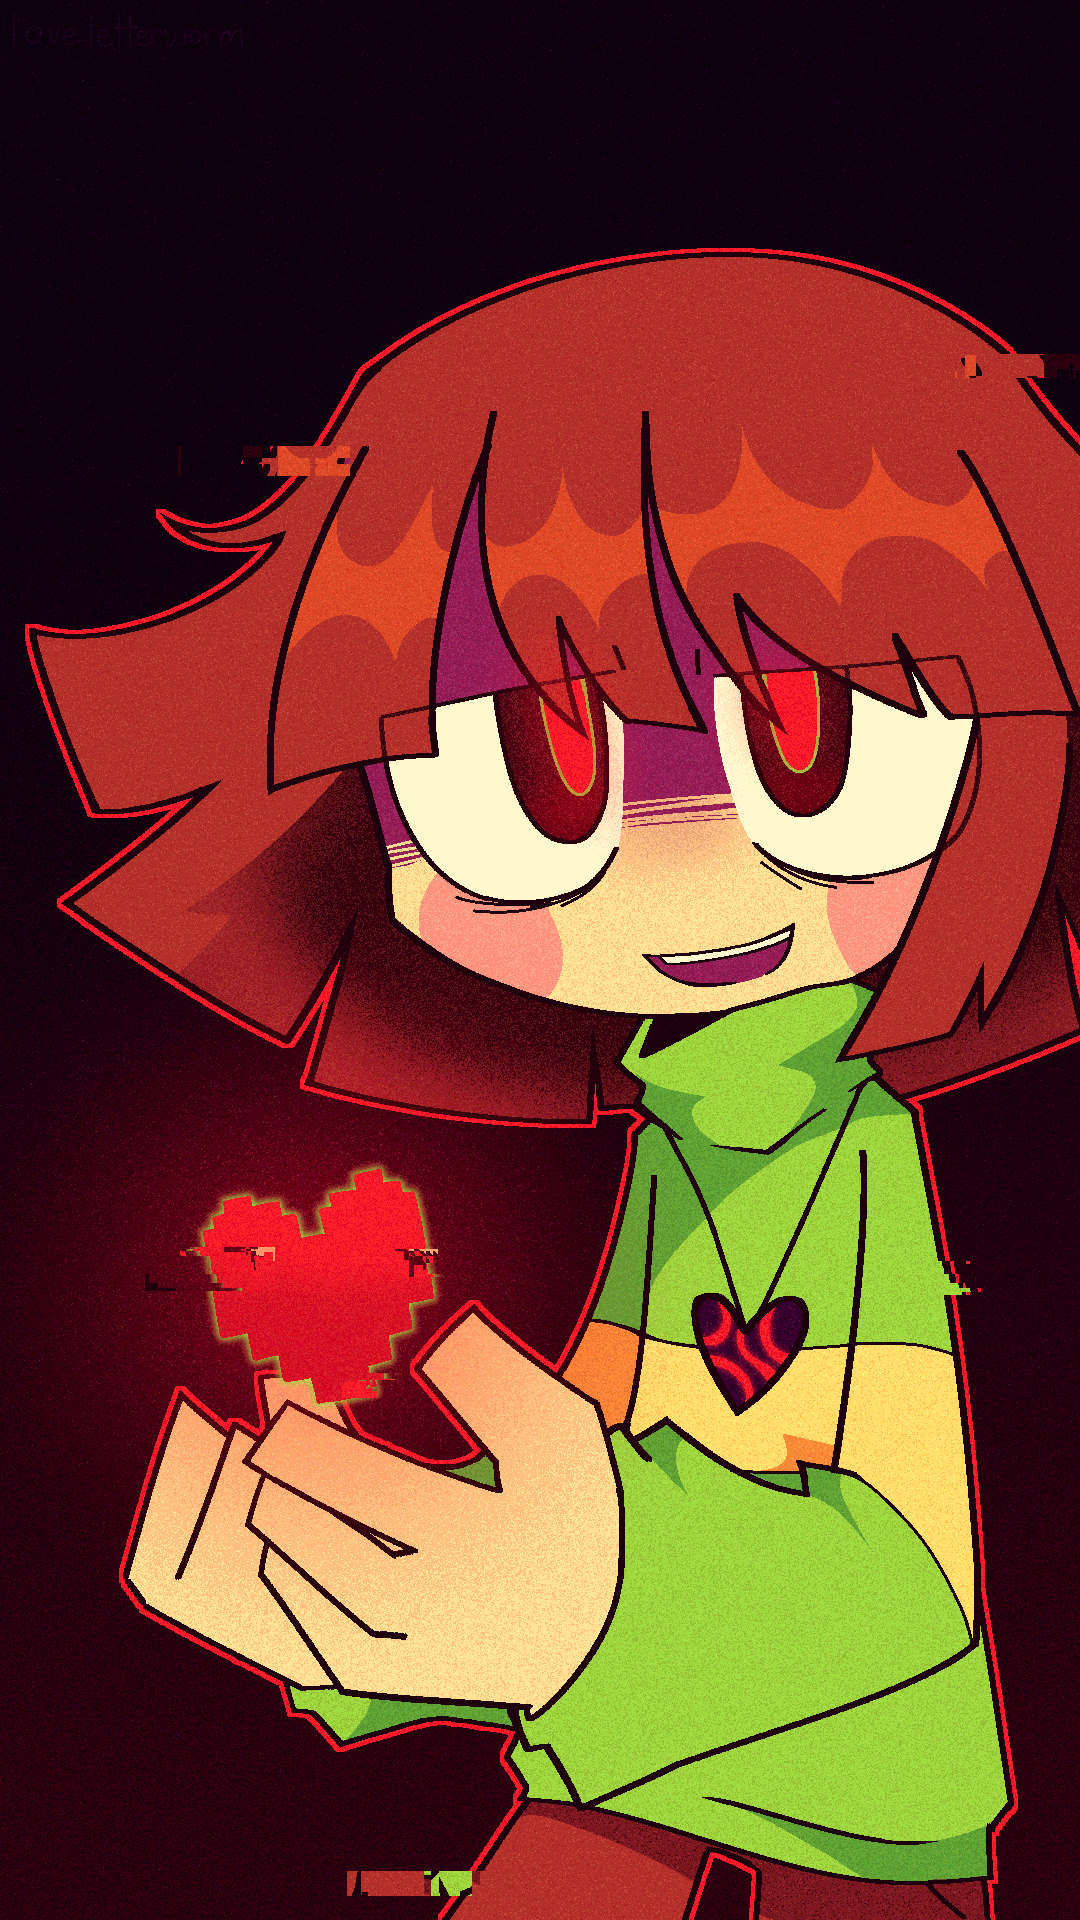 A drawing of Chara from Undertale. They have their hands cupped in front of them, with a pixel heart (the Soul from Undertale) hovering above their fingers. Their expression is a sarcastic, tired smile. The image is edited so that some sections of the picture seem mildly 'glitchy'.